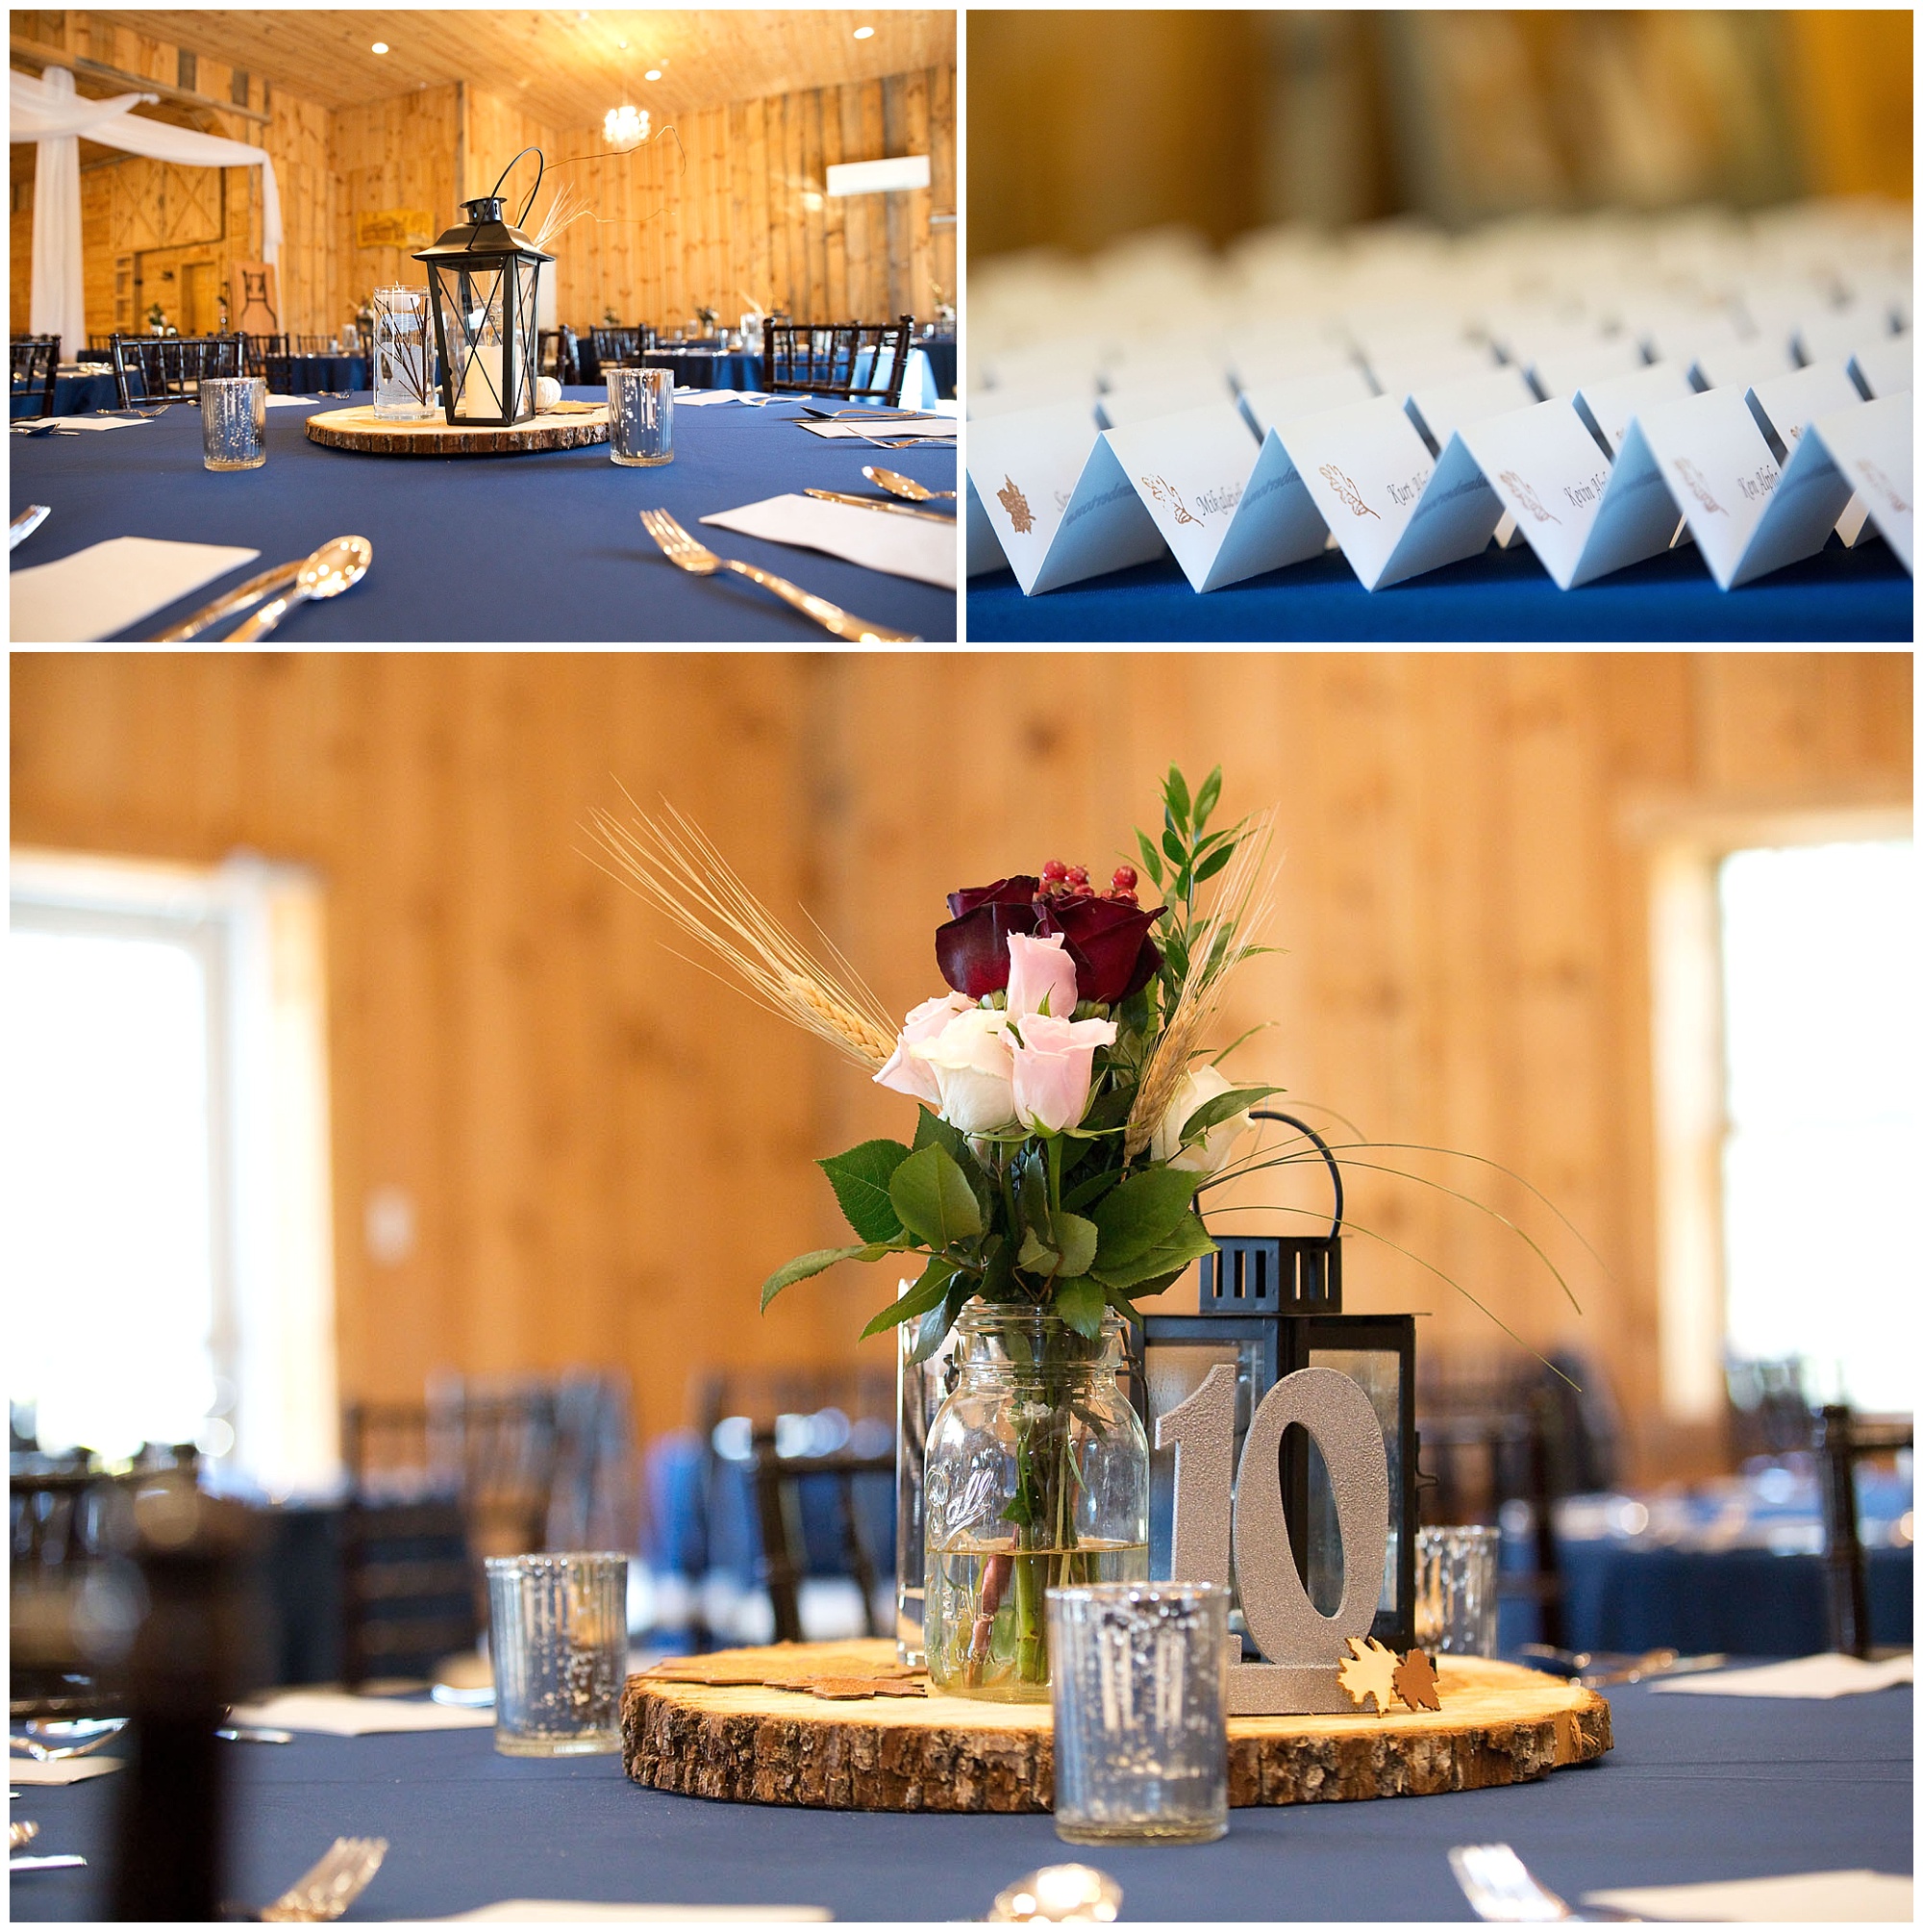 Photo of rweddnig reception center pieces and another of the place cards with guest names.